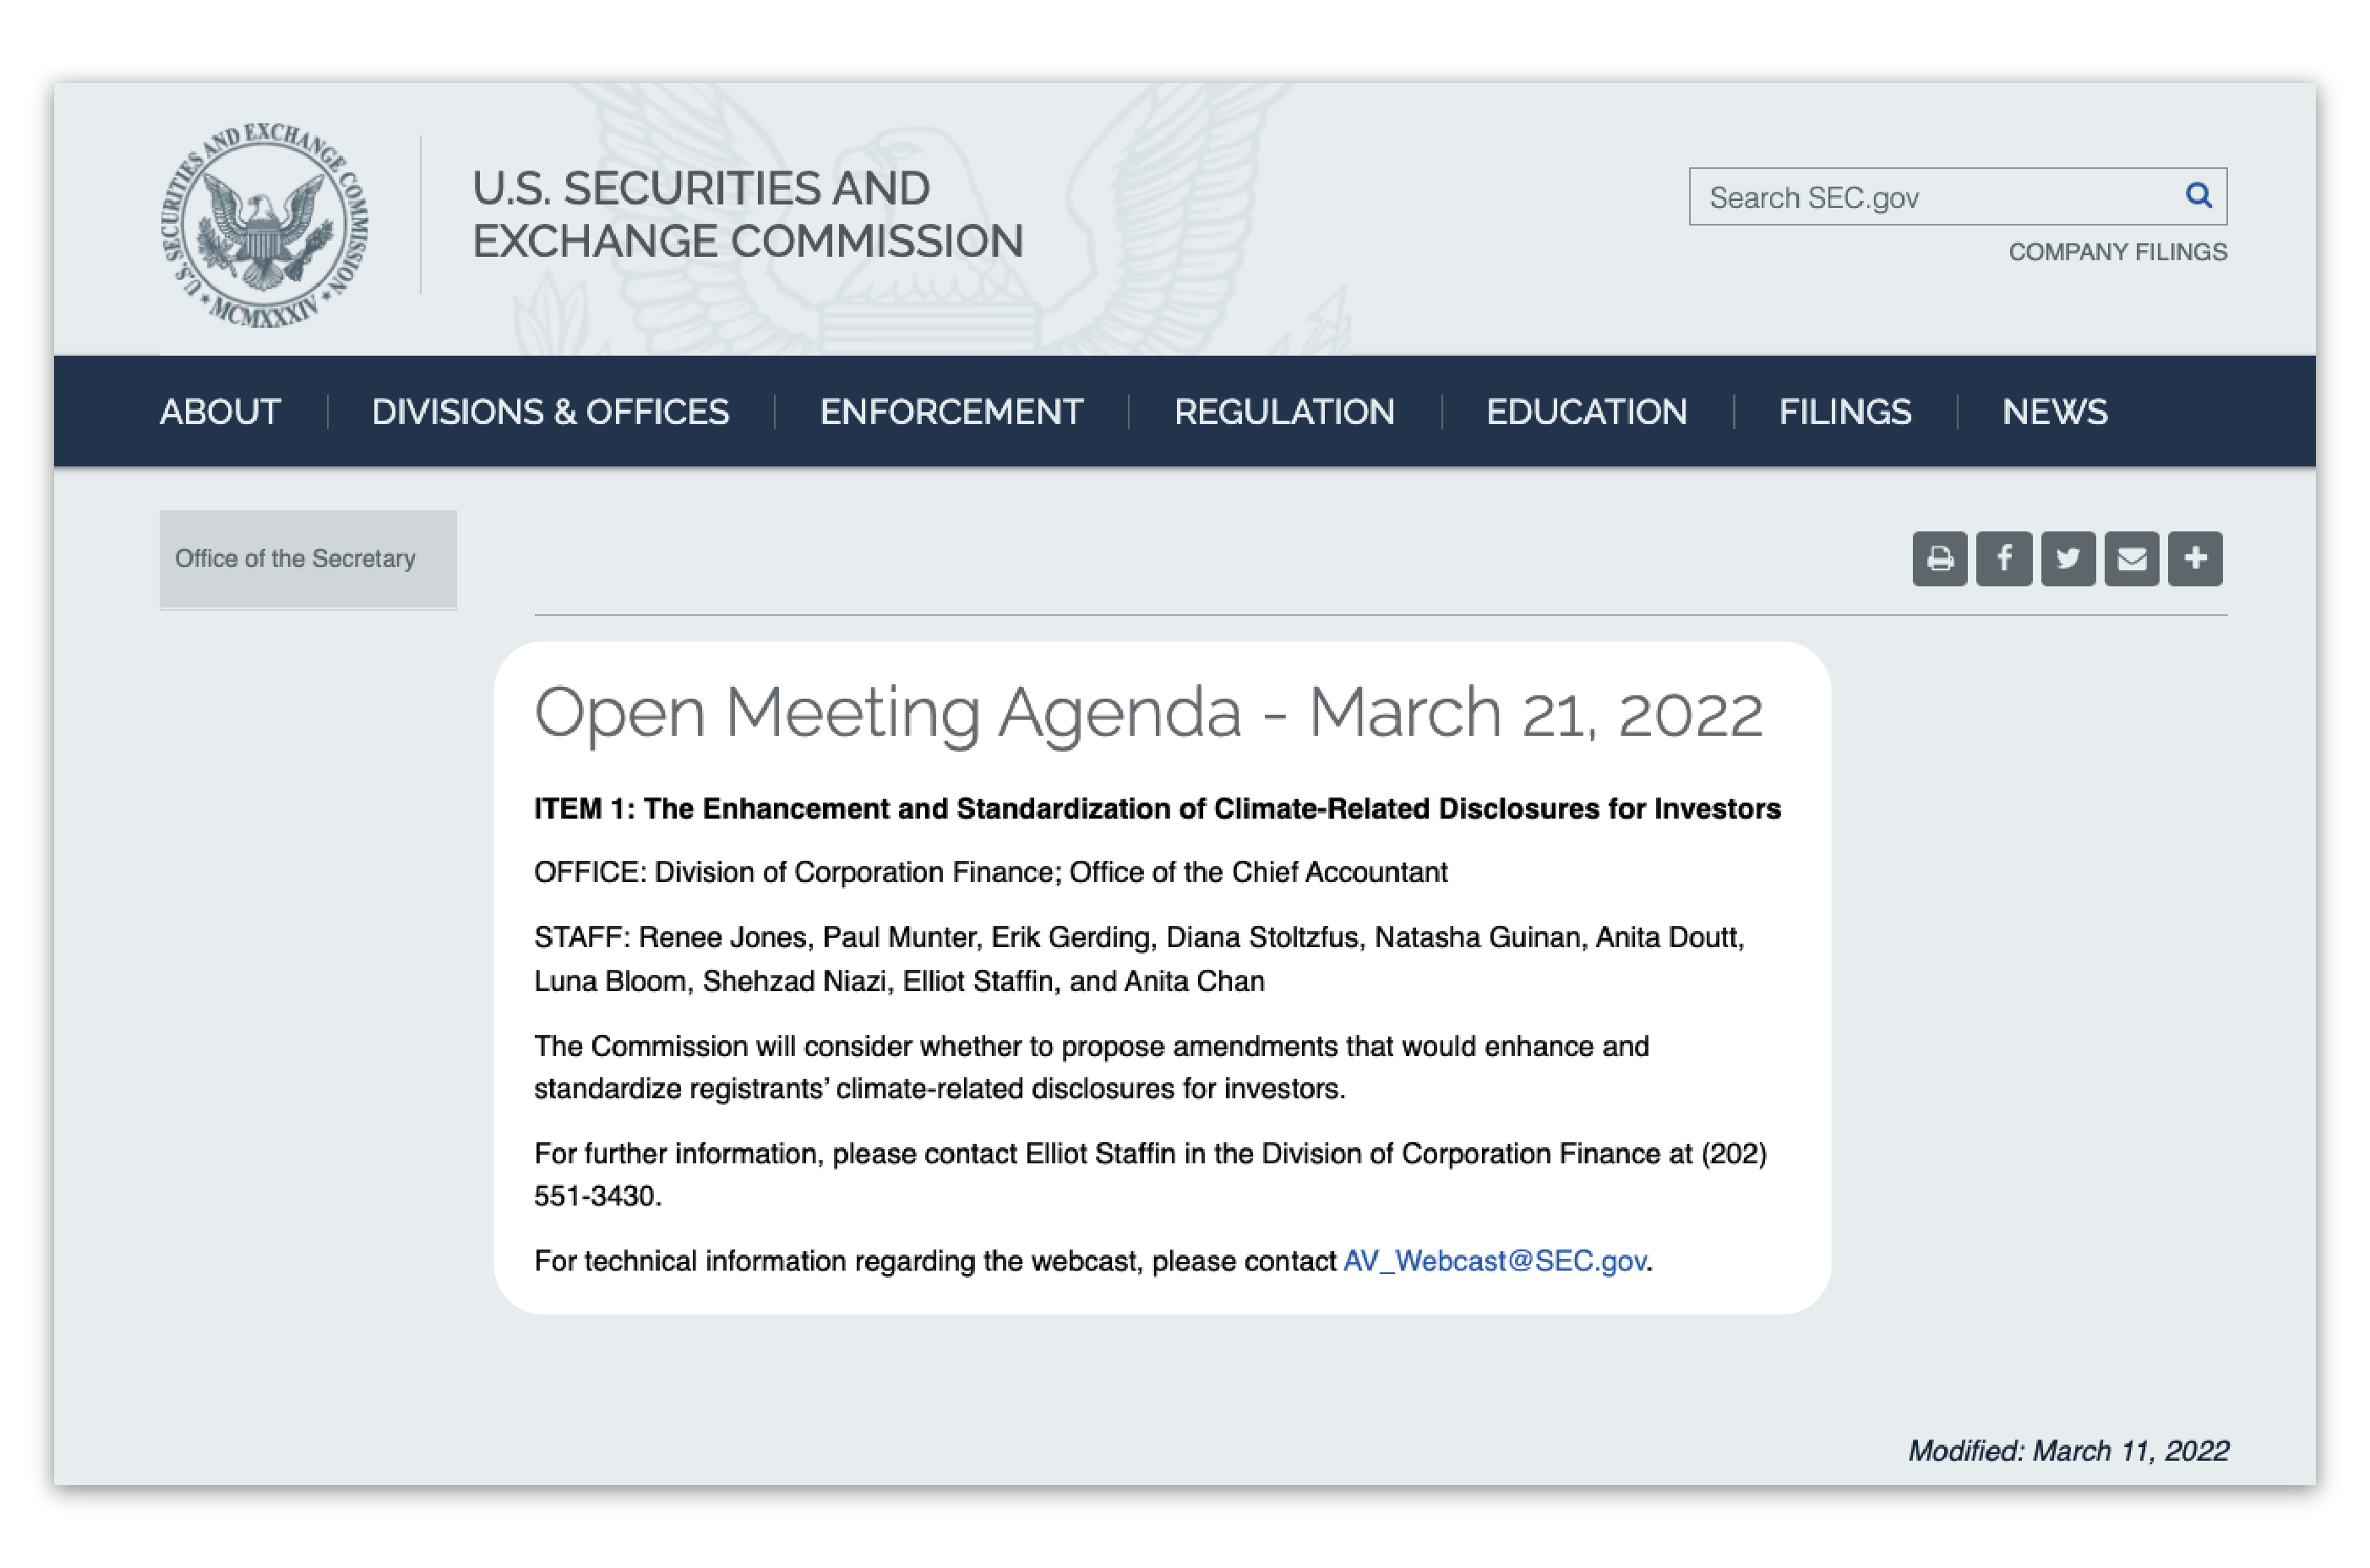 Announcement from US. Securities and Exchange Commission: "Open Meeting Agenda - March 21, 2022. Item 1: The Enhancement and Standardization of Climate-Related Disclosures for Investors...The Commission will consider whether to propose amendments that would enhance and standardize registrants’ climate-related disclosures for investors."